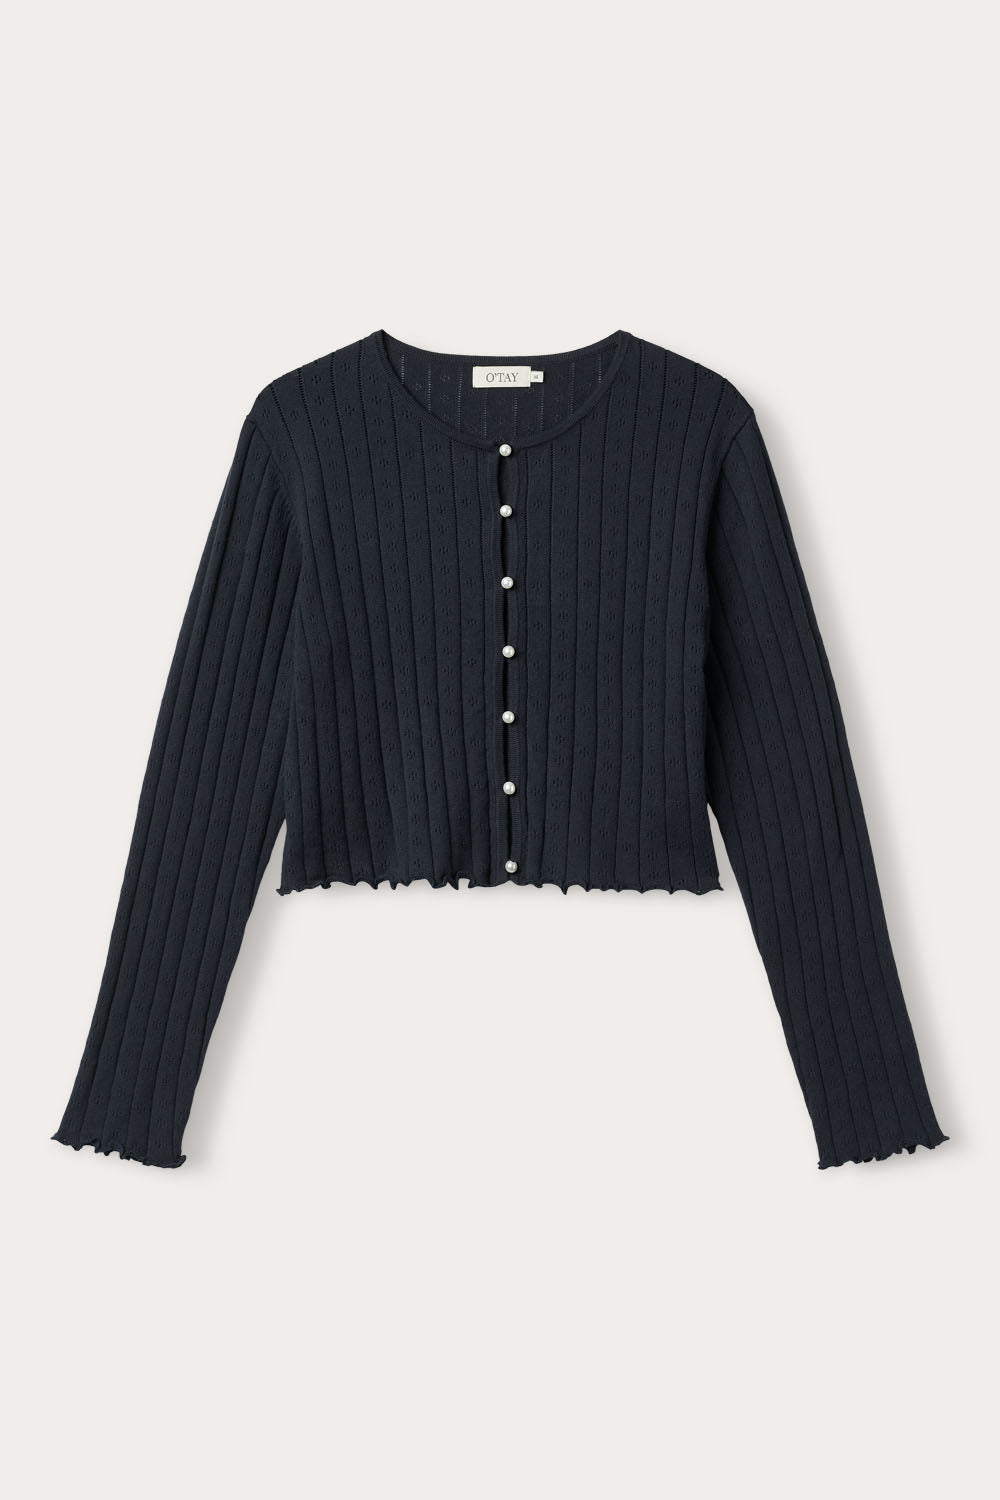 Cashmere Cardigans | Shop exquisite knitted cardigans in cashmere 